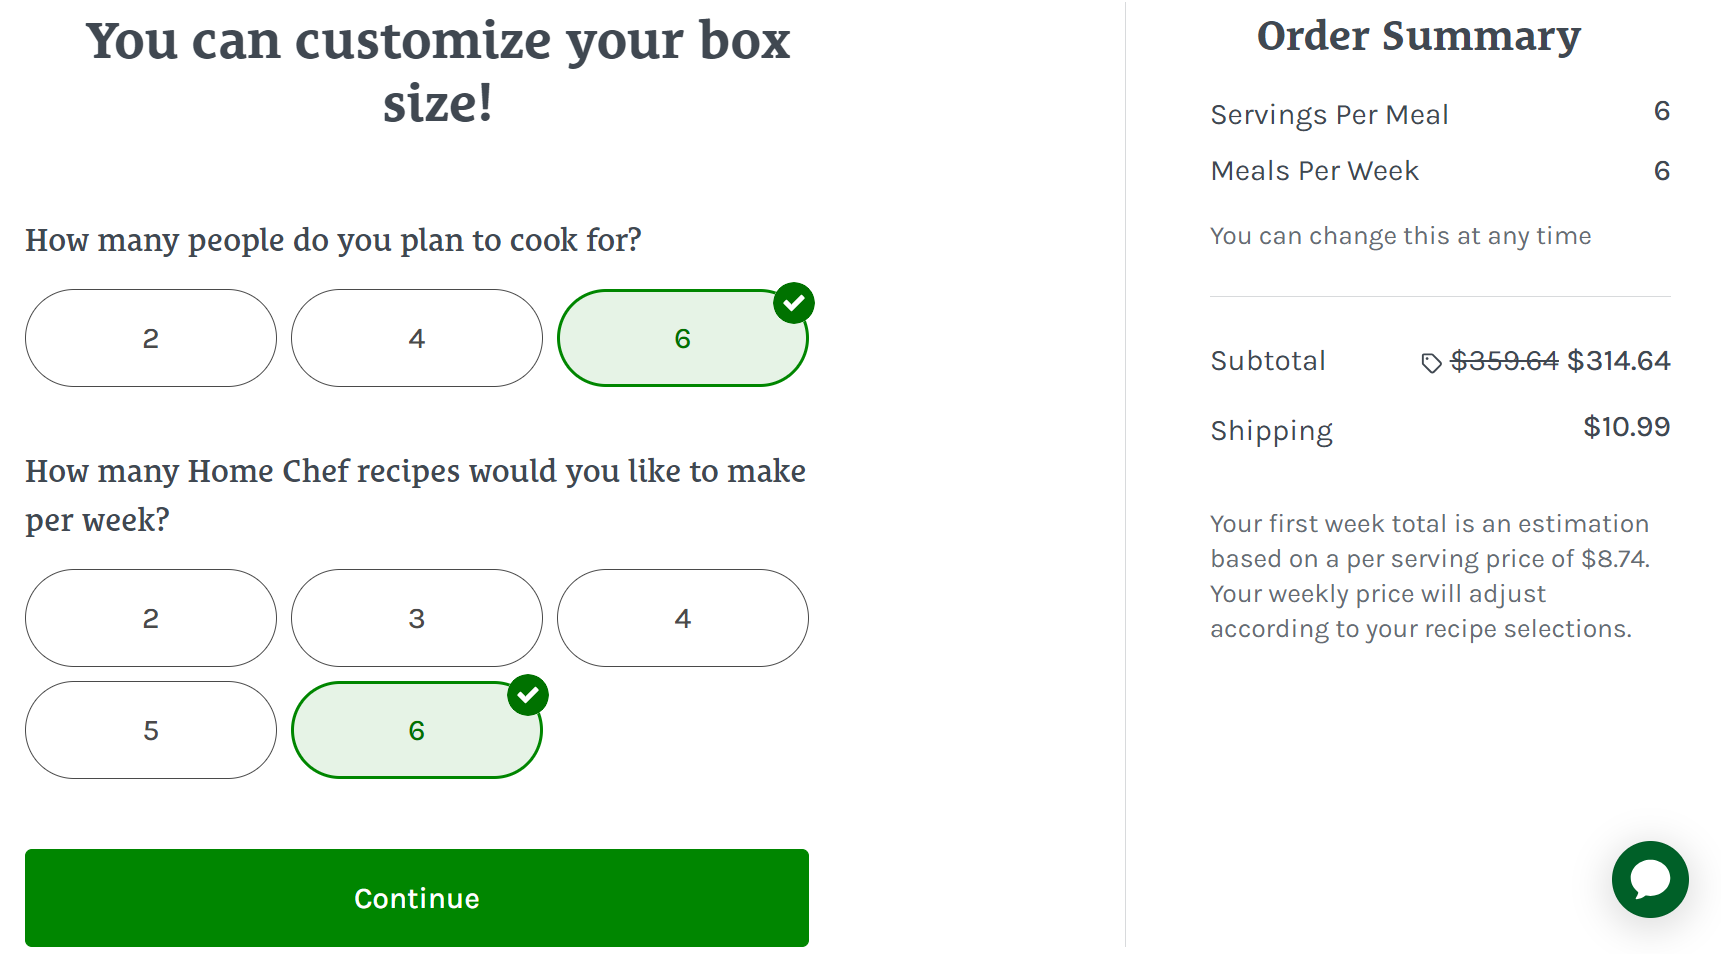 Home Chef order summary with selection options and cost